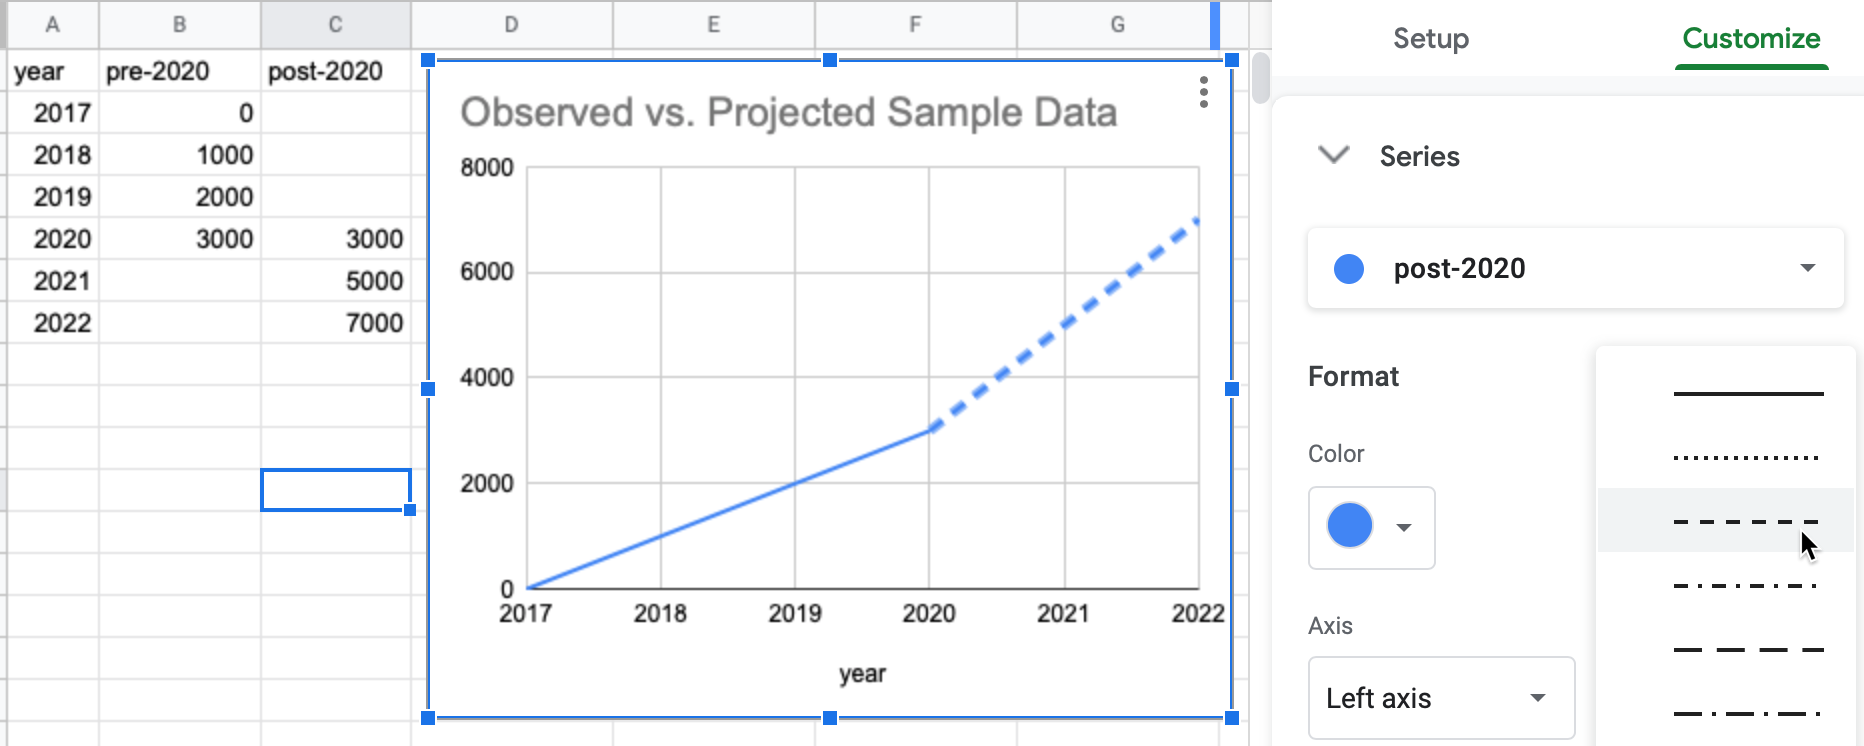 Split one data column into two columns to contrast observed data (solid line) versus projected data (dashed line).